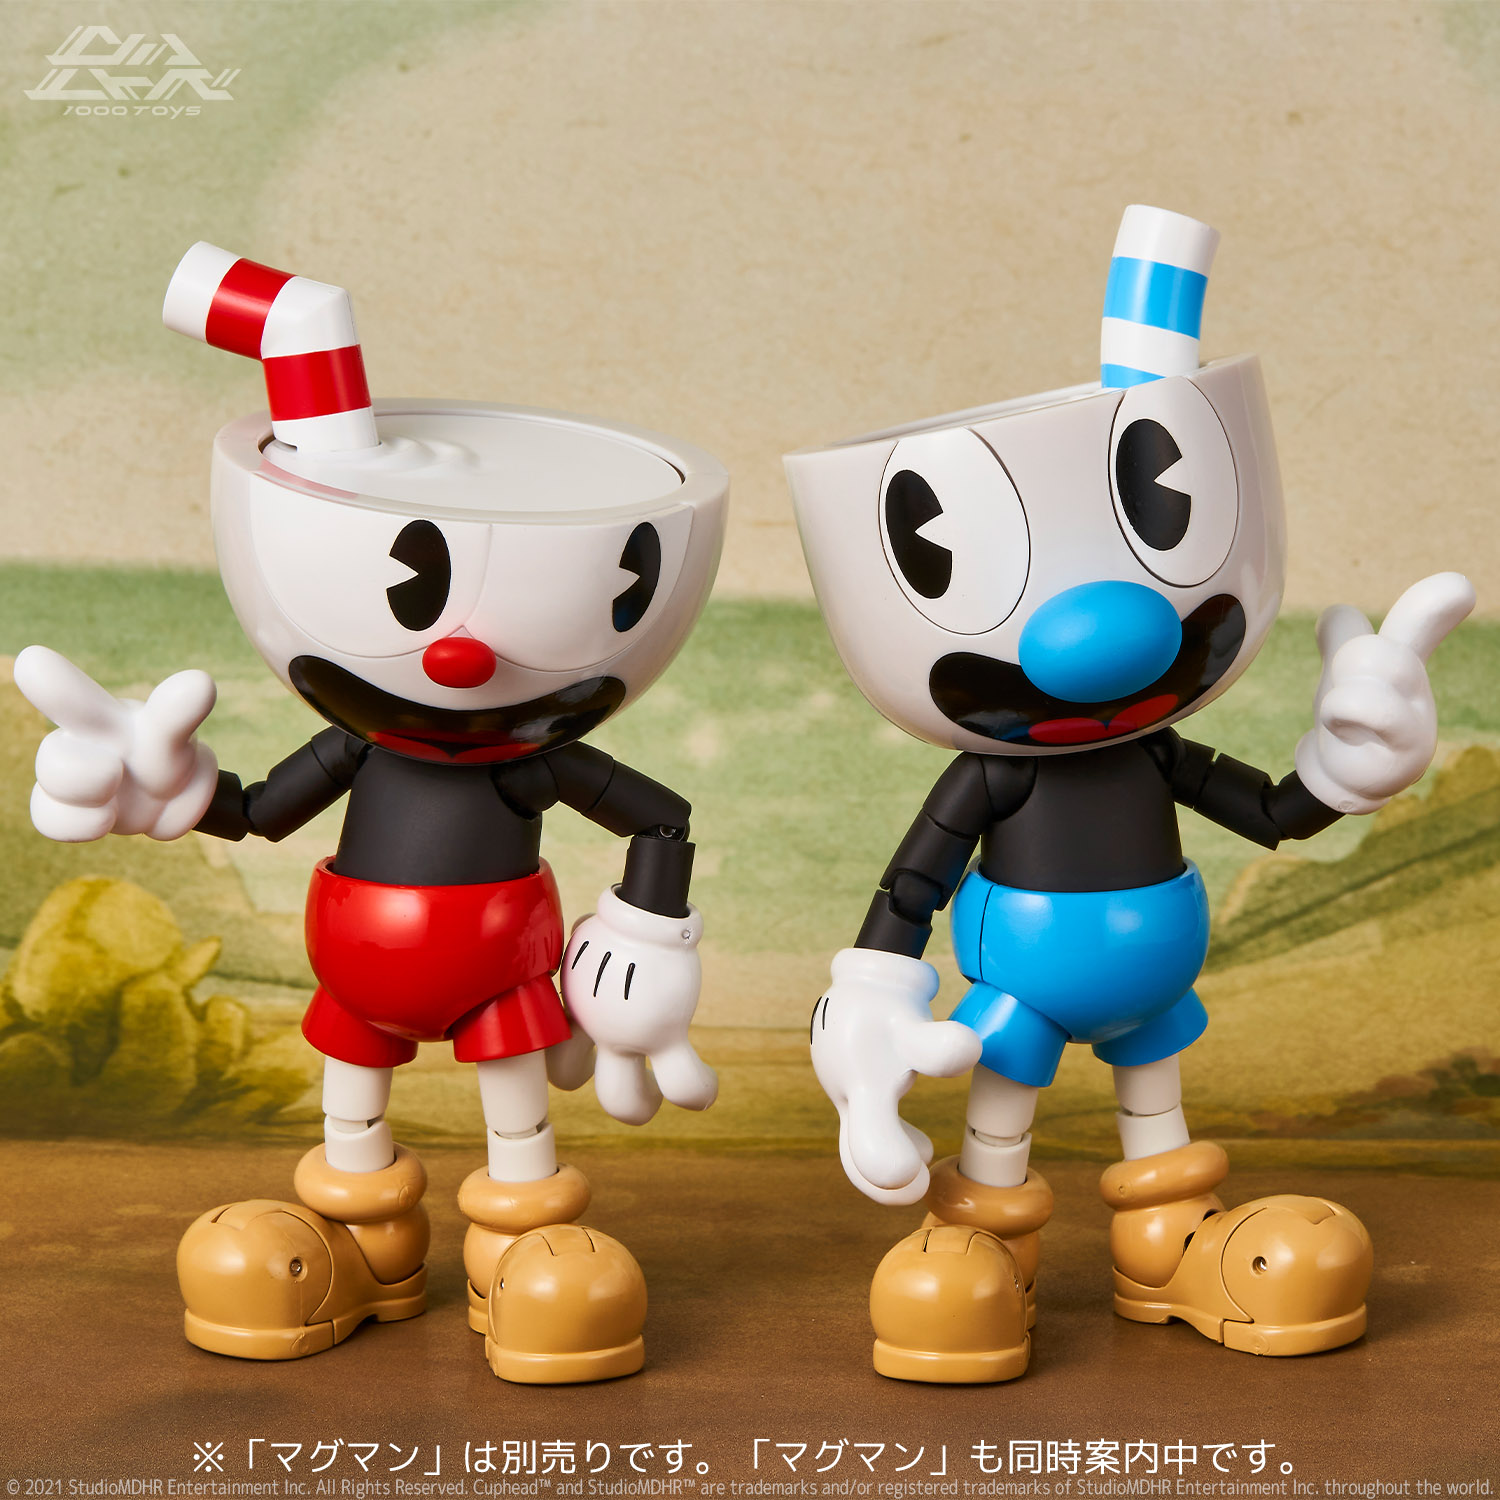 StudioMDHR x 1000toys presents CupHead and Mugman - The Toy Chronicle